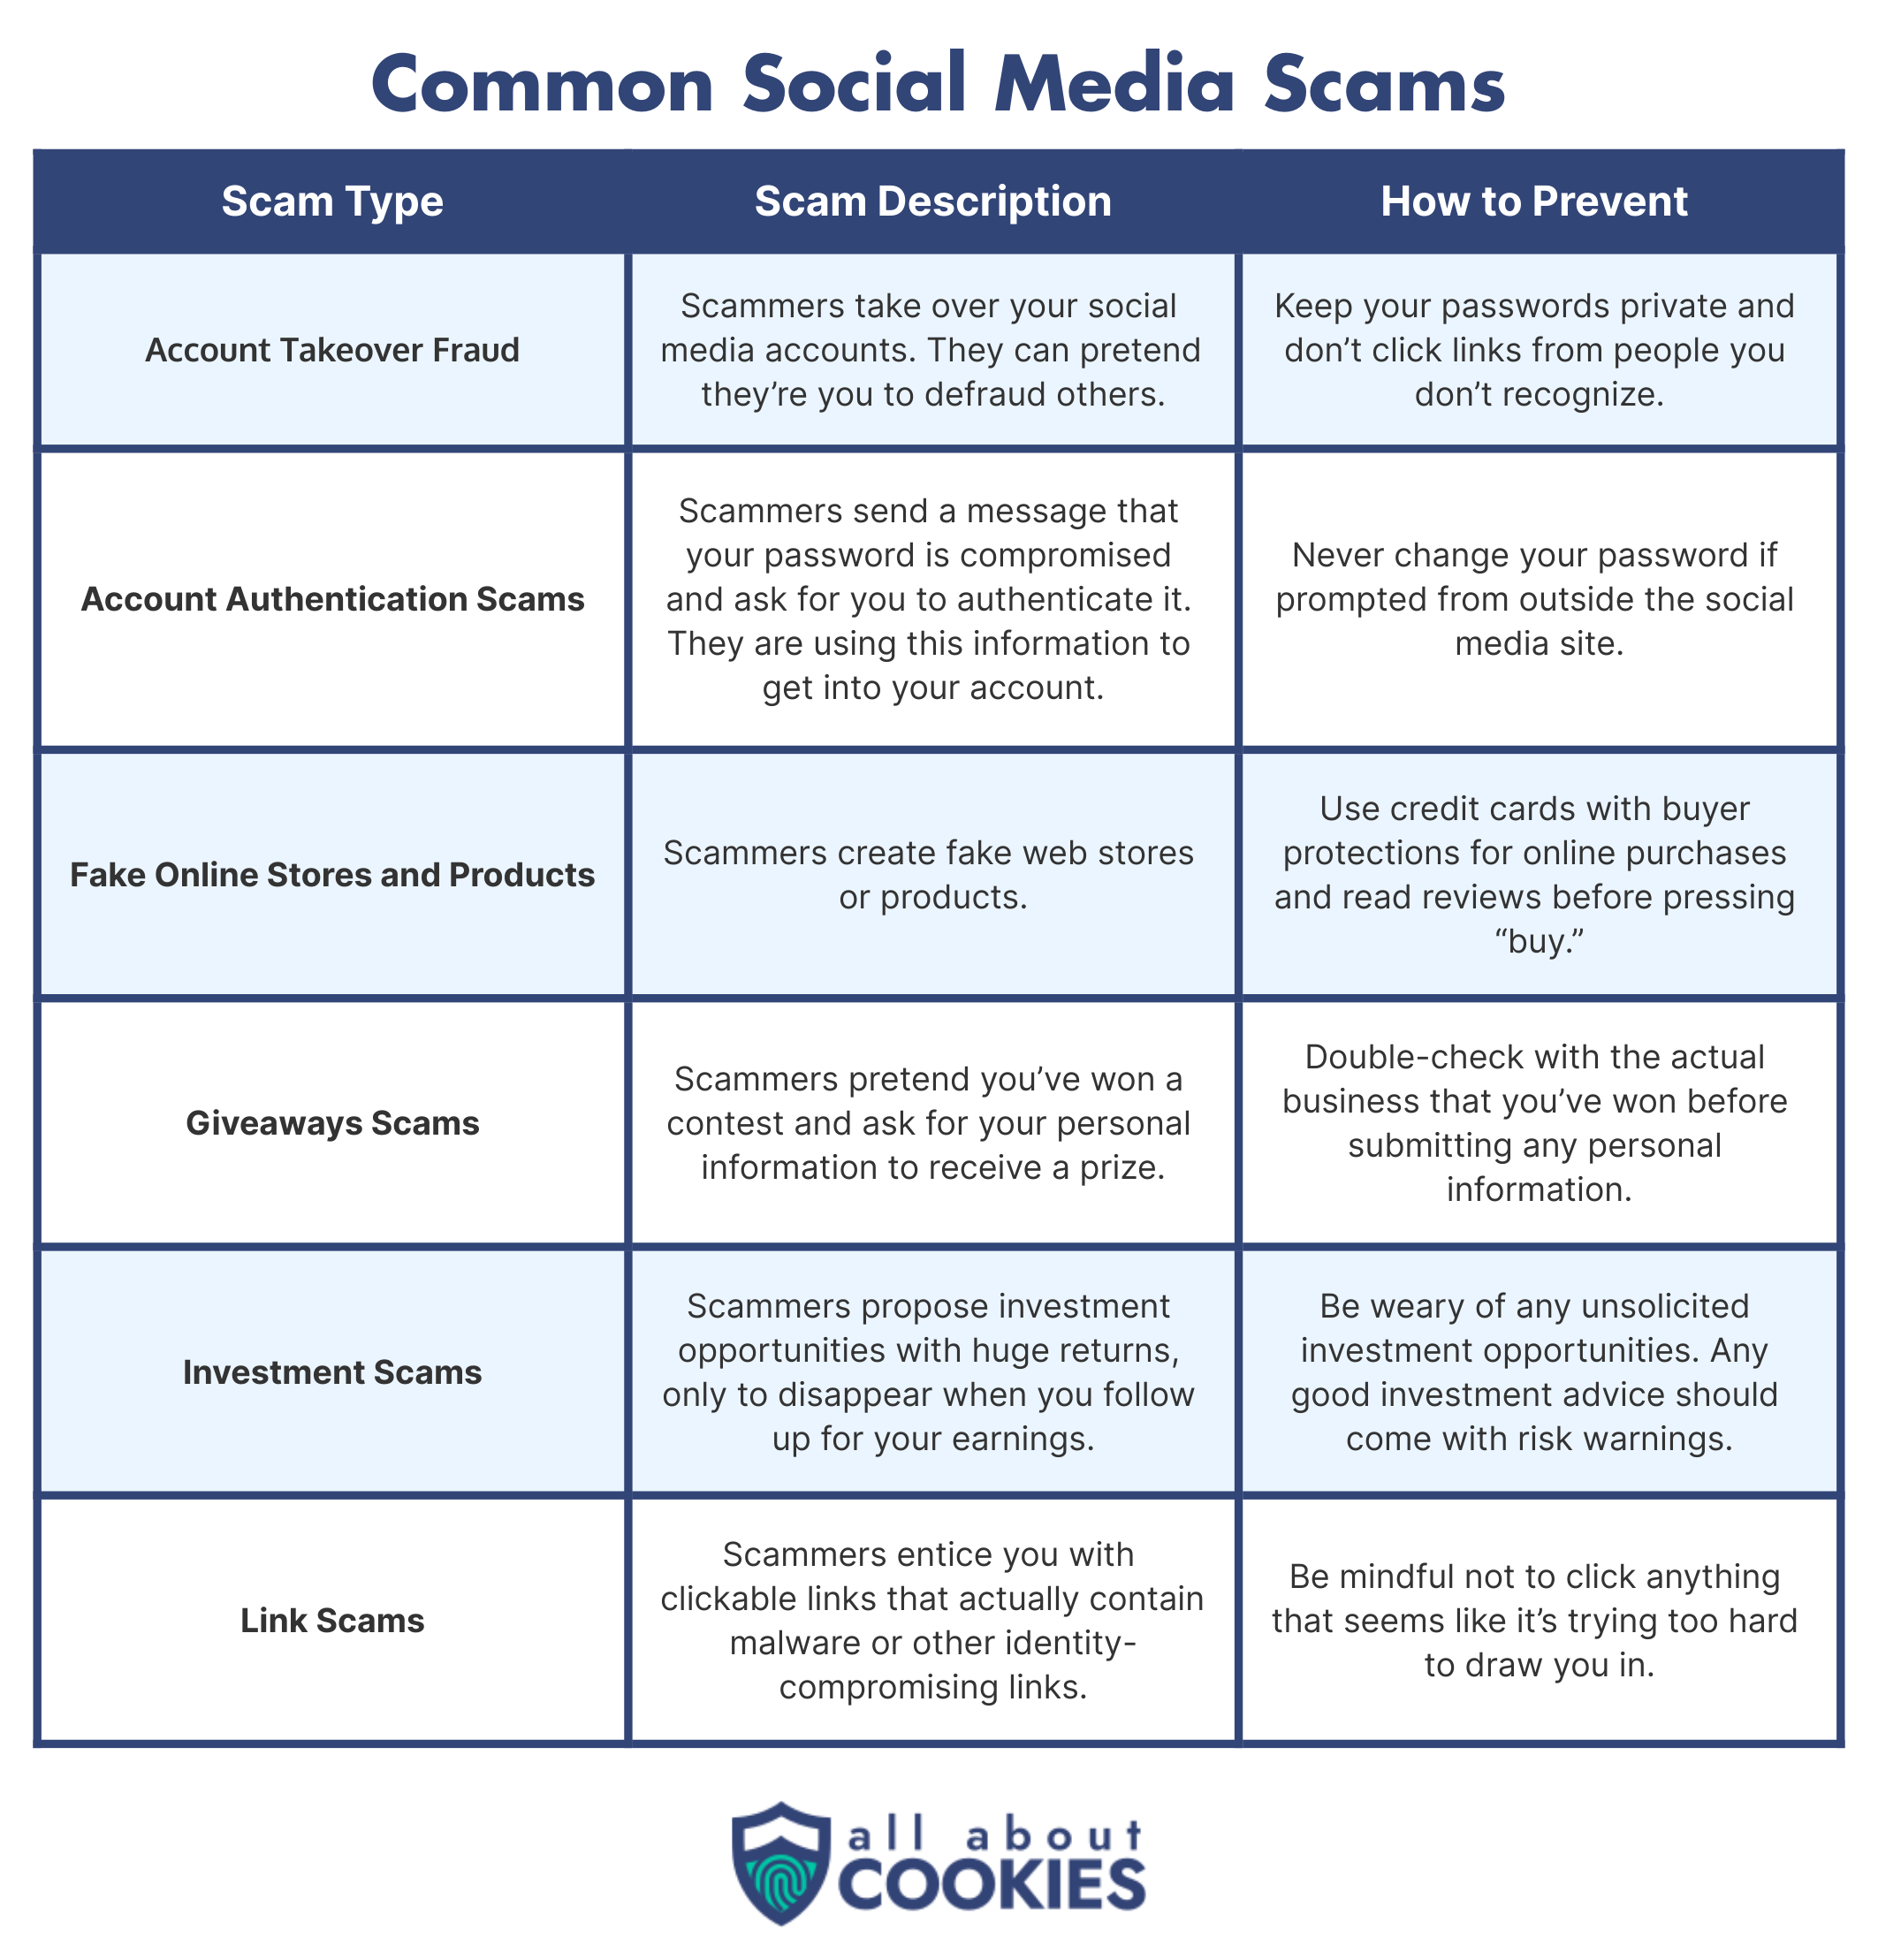 Table sharing types of social media scams targeting senior adults and how to prevent them.